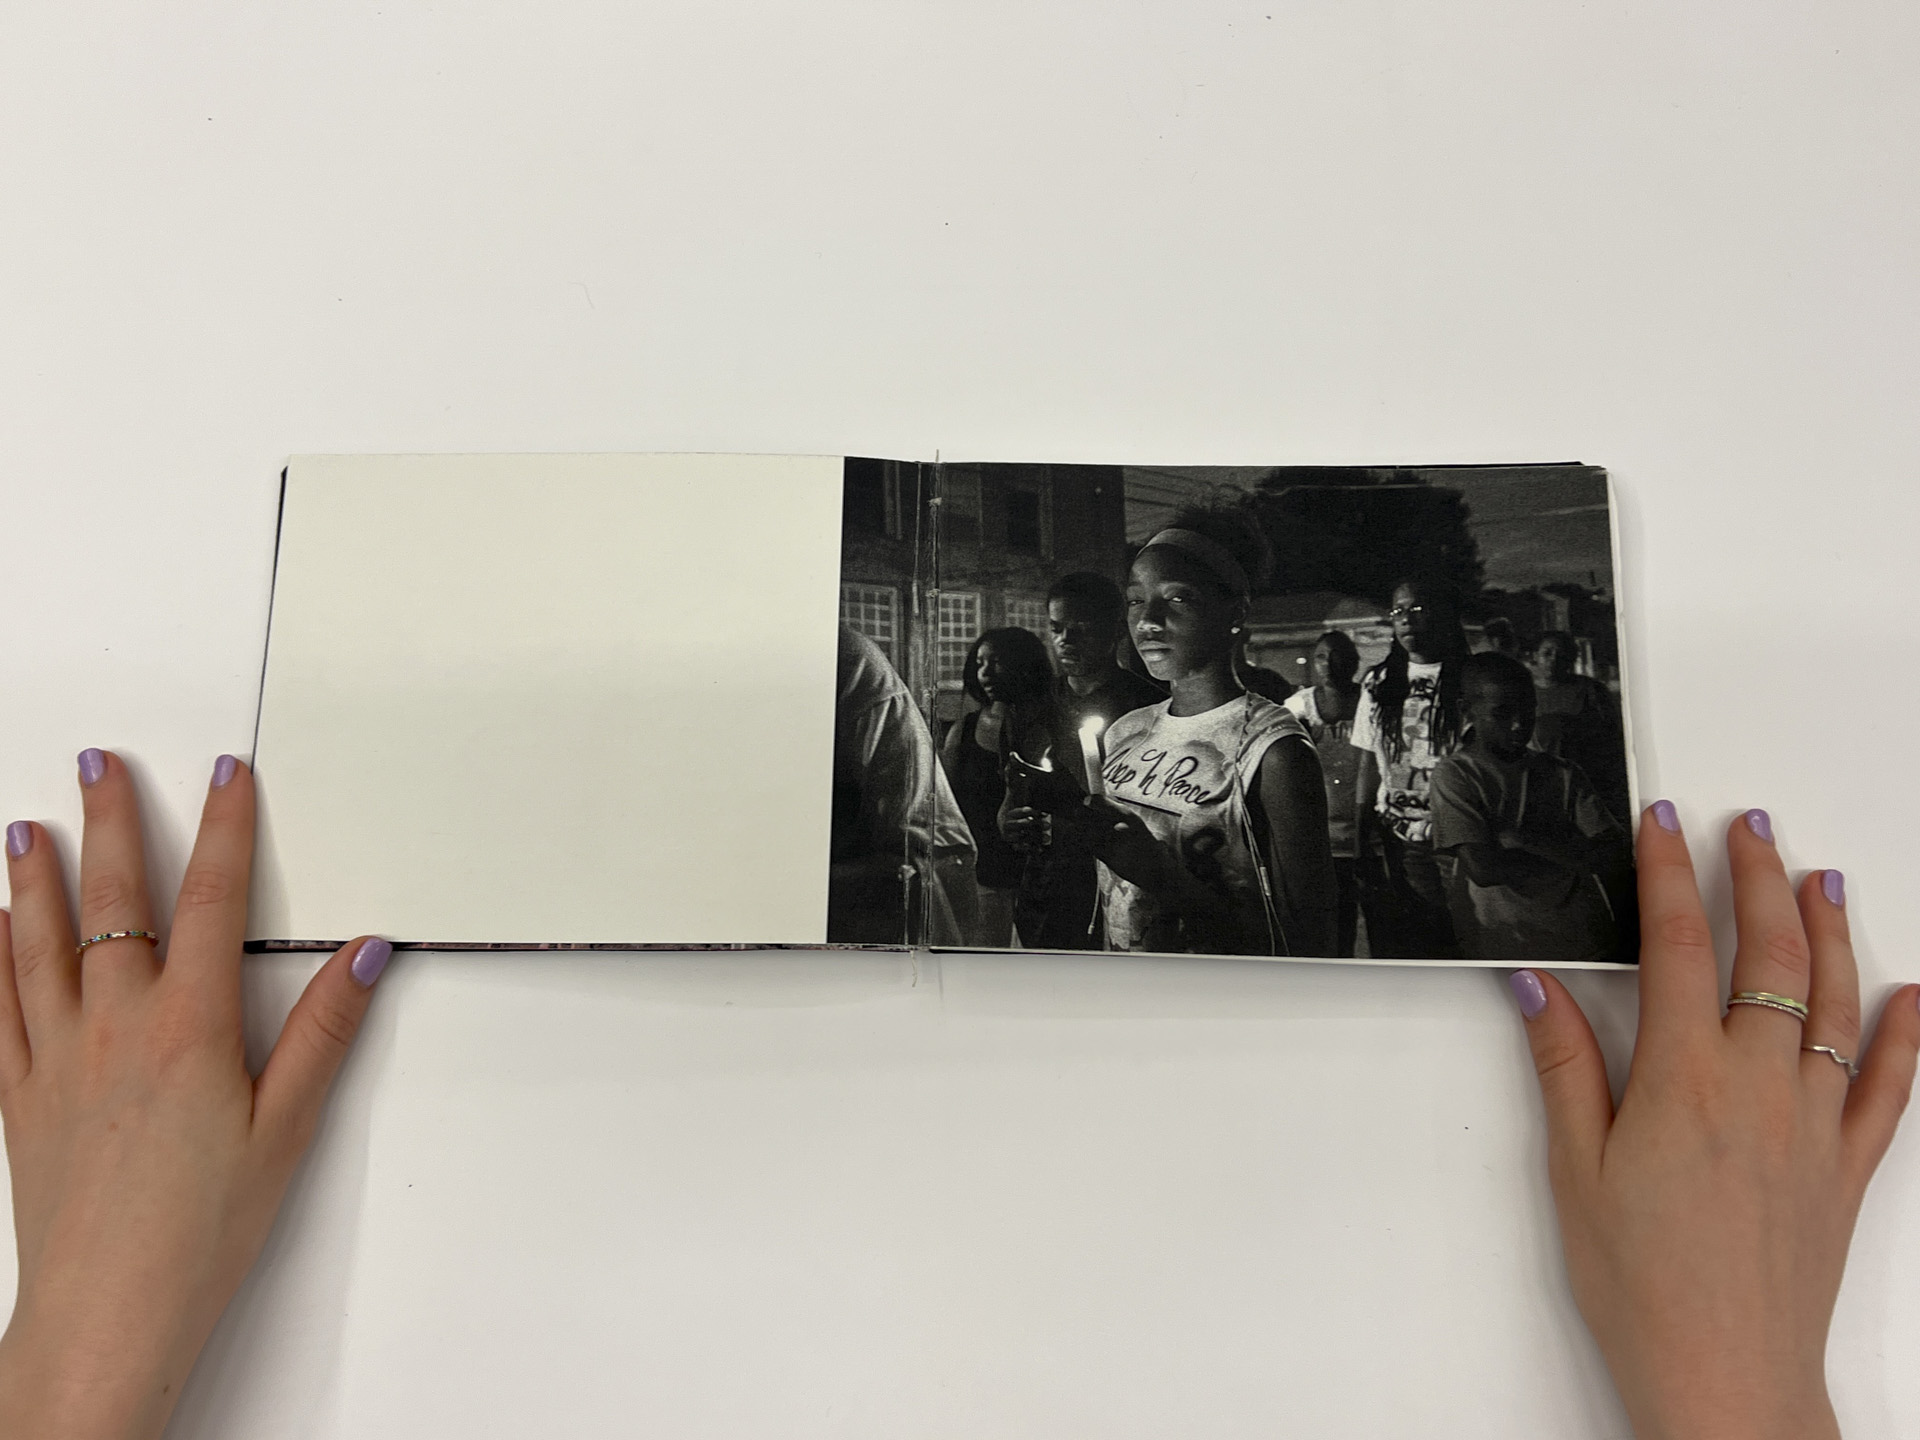 book opened to a black and white photo with people at a candlelight vigil